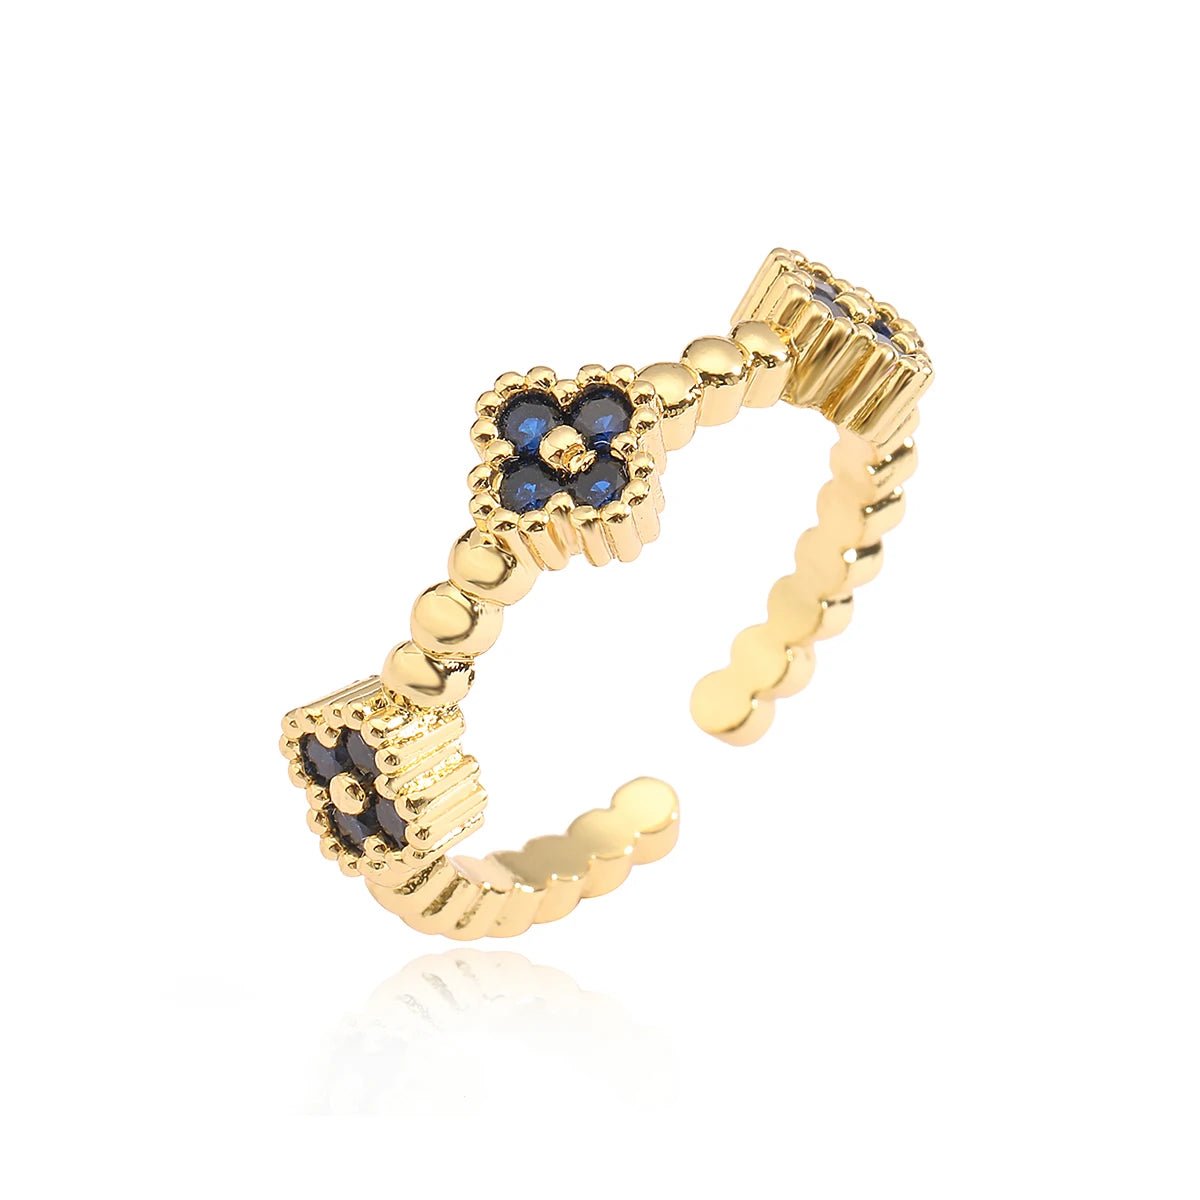 Resizable Trio Textured Floral Rings - Veinci